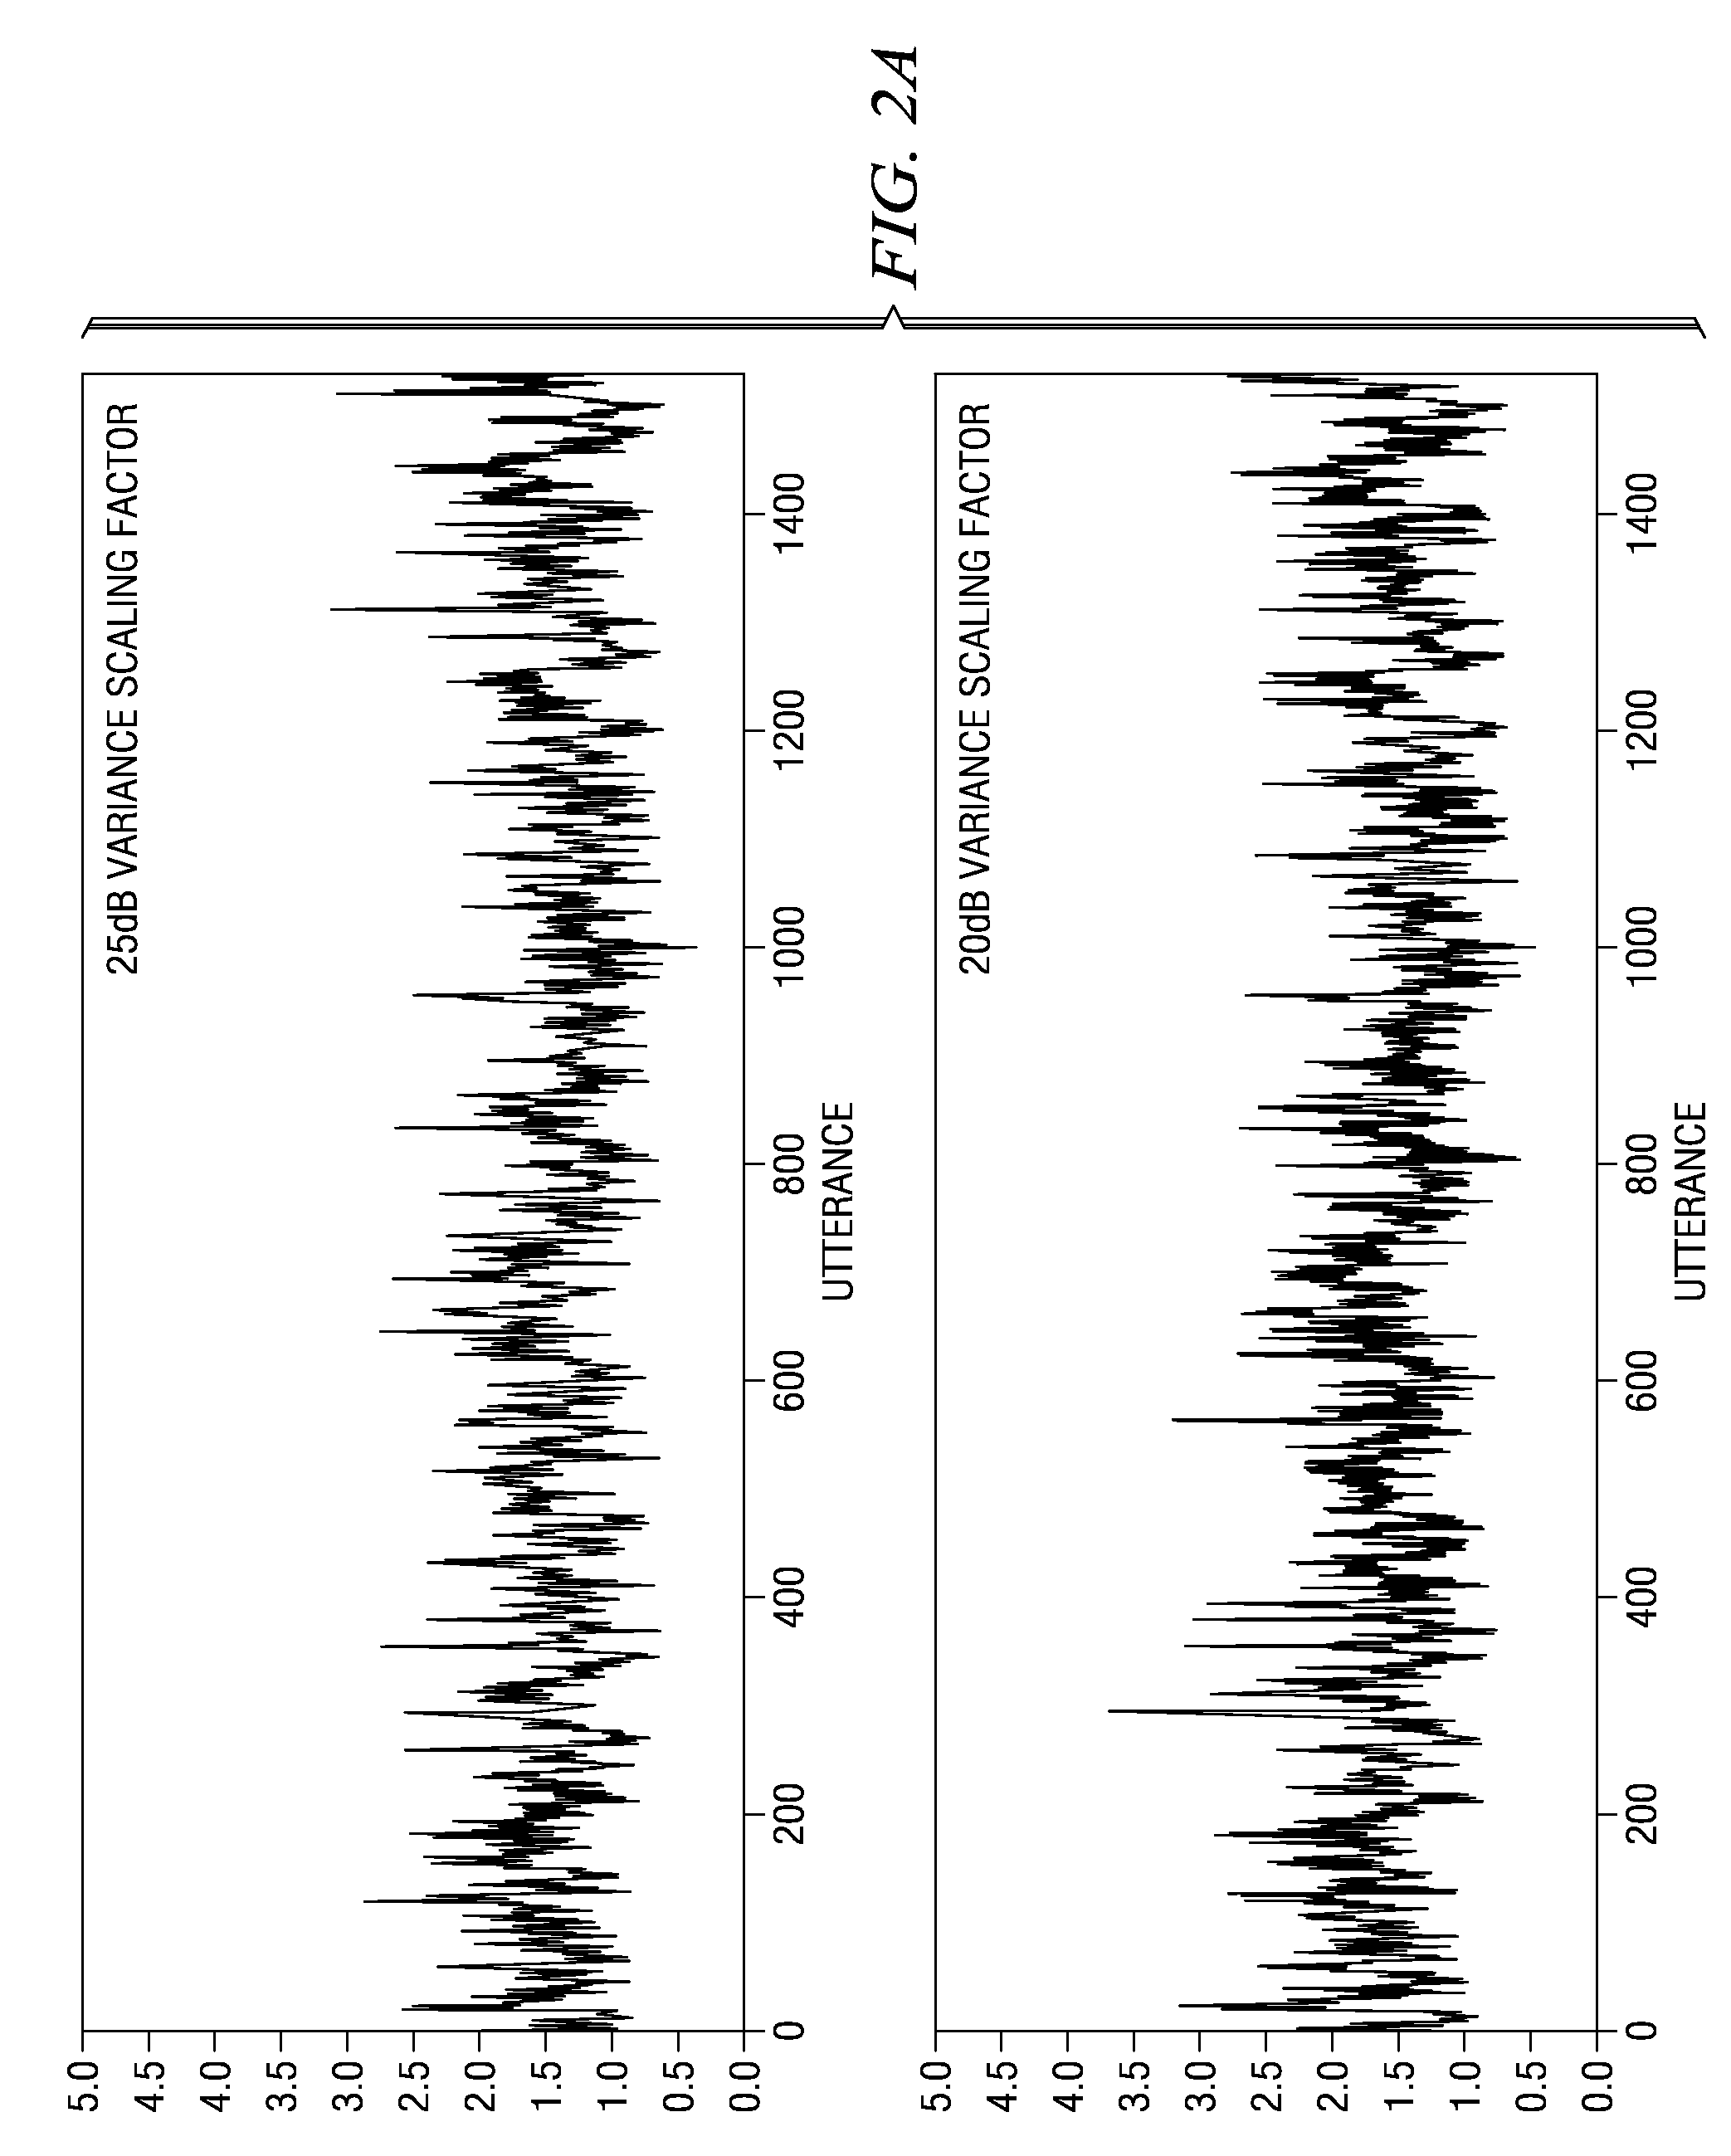 Weighted sequential variance adaptation with prior knowledge for noise robust speech recognition